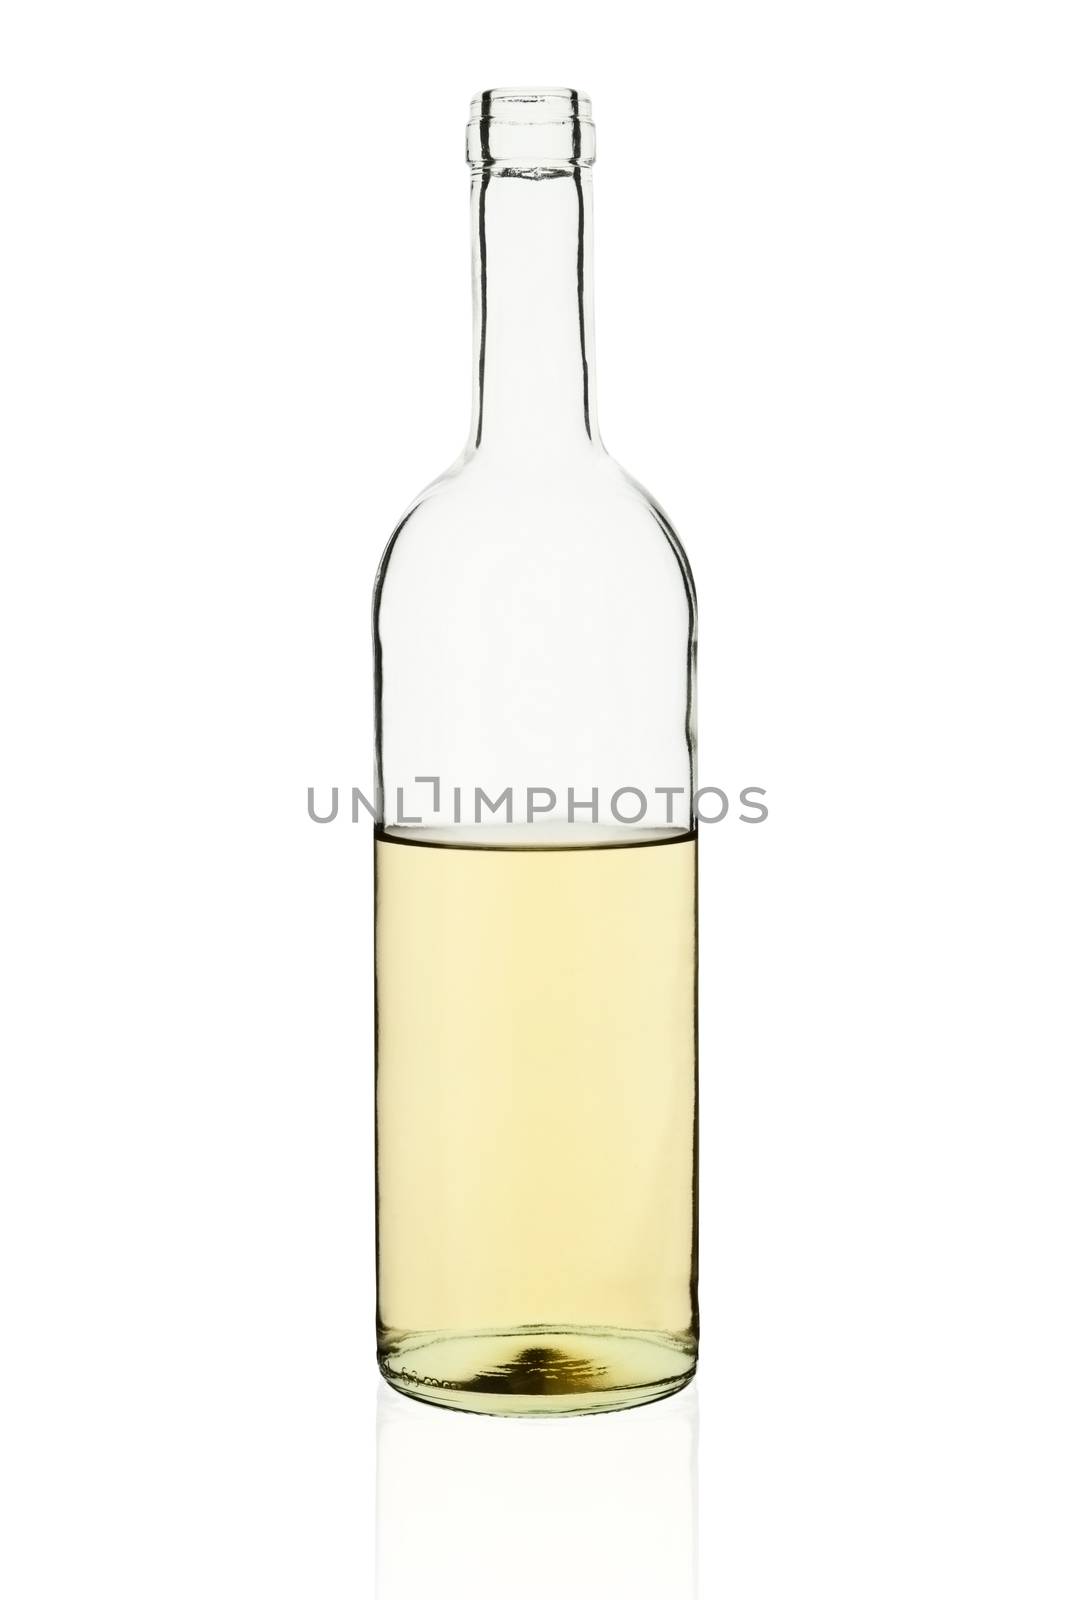 Transparent wine bottle without label isolated on white background with clipping path.